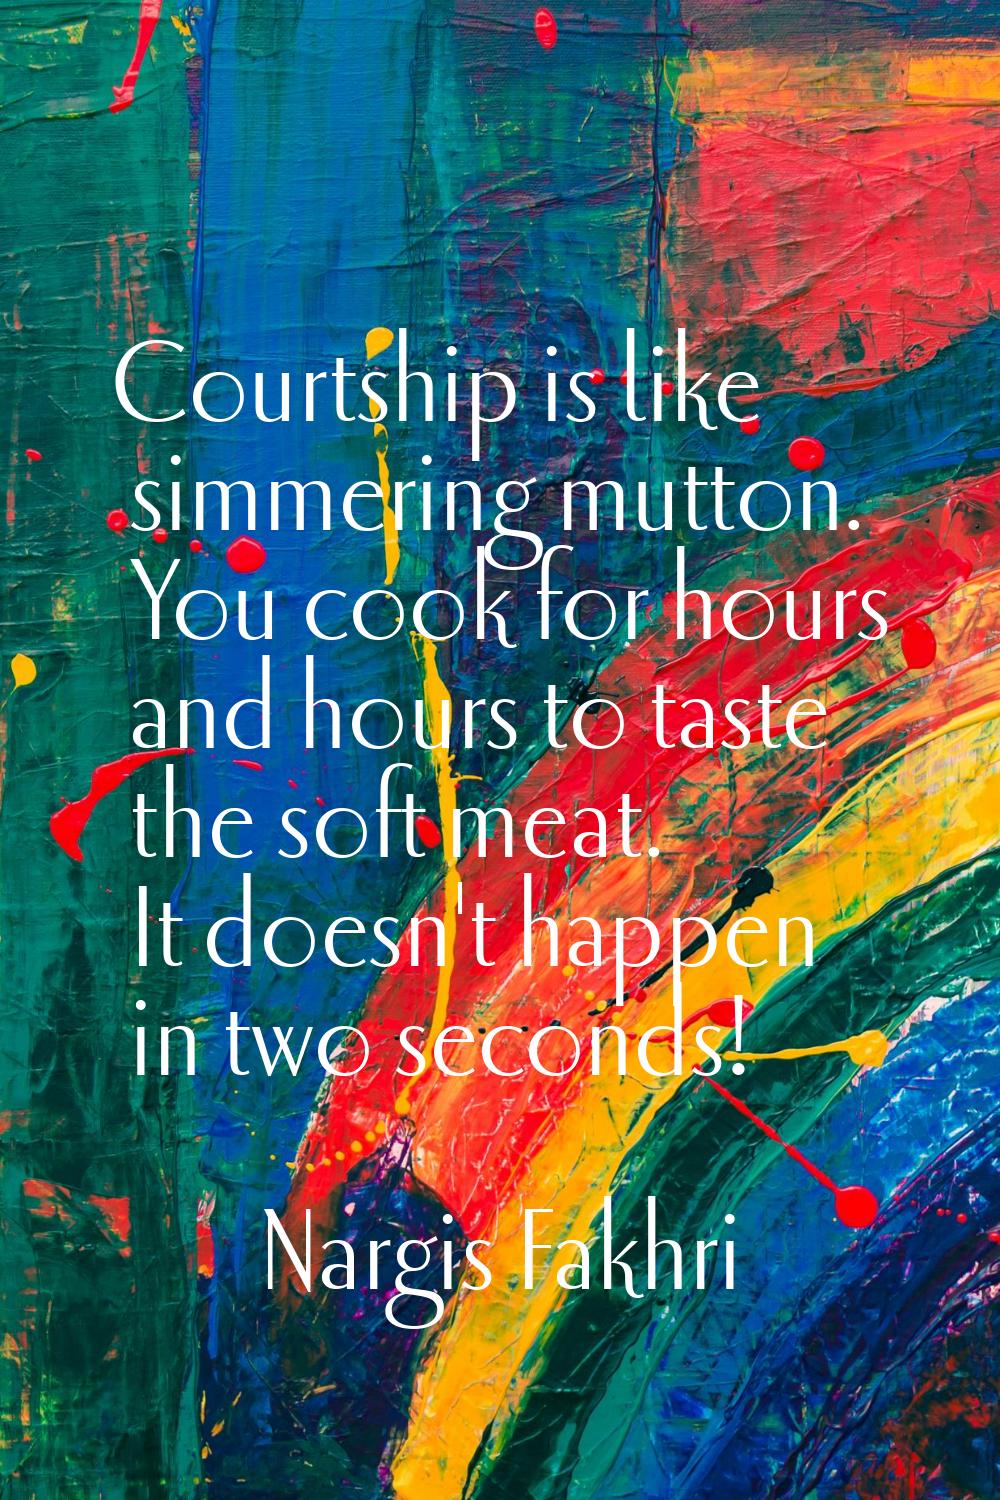 Courtship is like simmering mutton. You cook for hours and hours to taste the soft meat. It doesn't